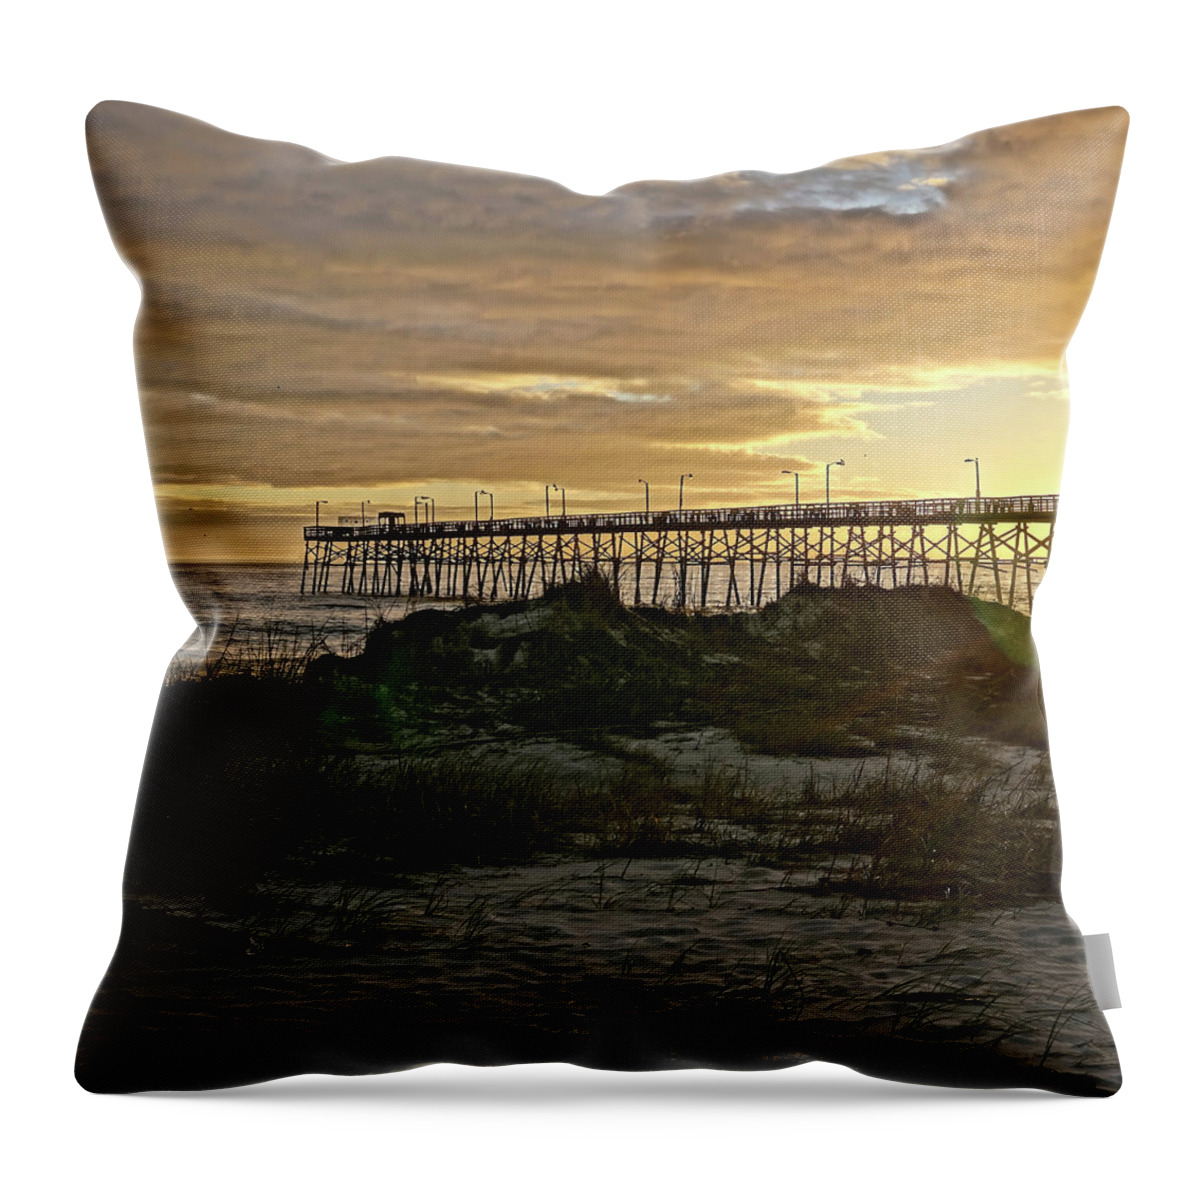 Sunset Throw Pillow featuring the photograph Oak Island Pier Sunset by Don Margulis